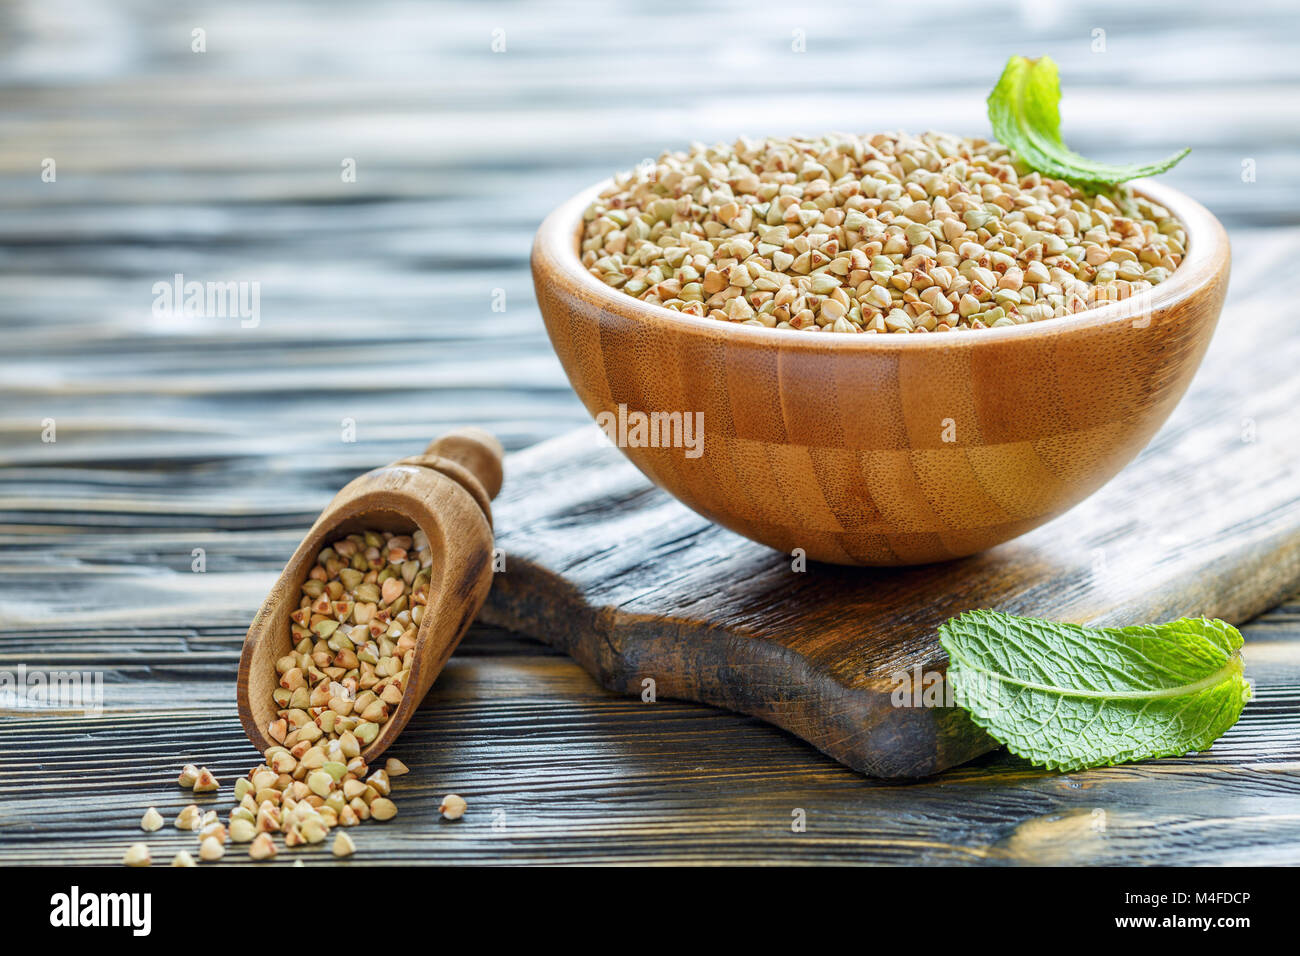 Green buckwheat and wooden scoop. Stock Photo